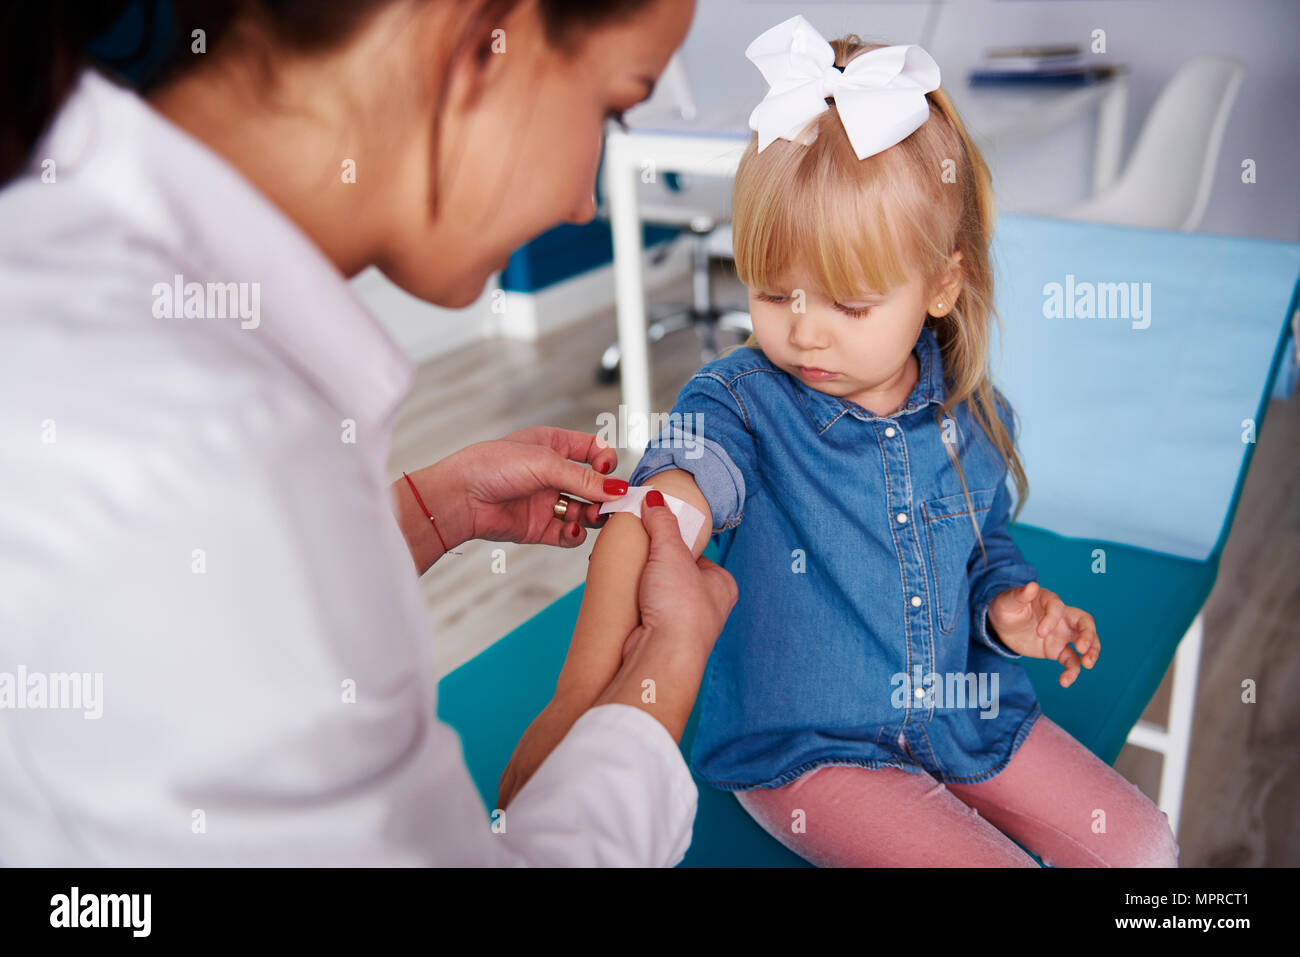 Doctor applying band-aid on girl's arm in medical practice Stock Photo